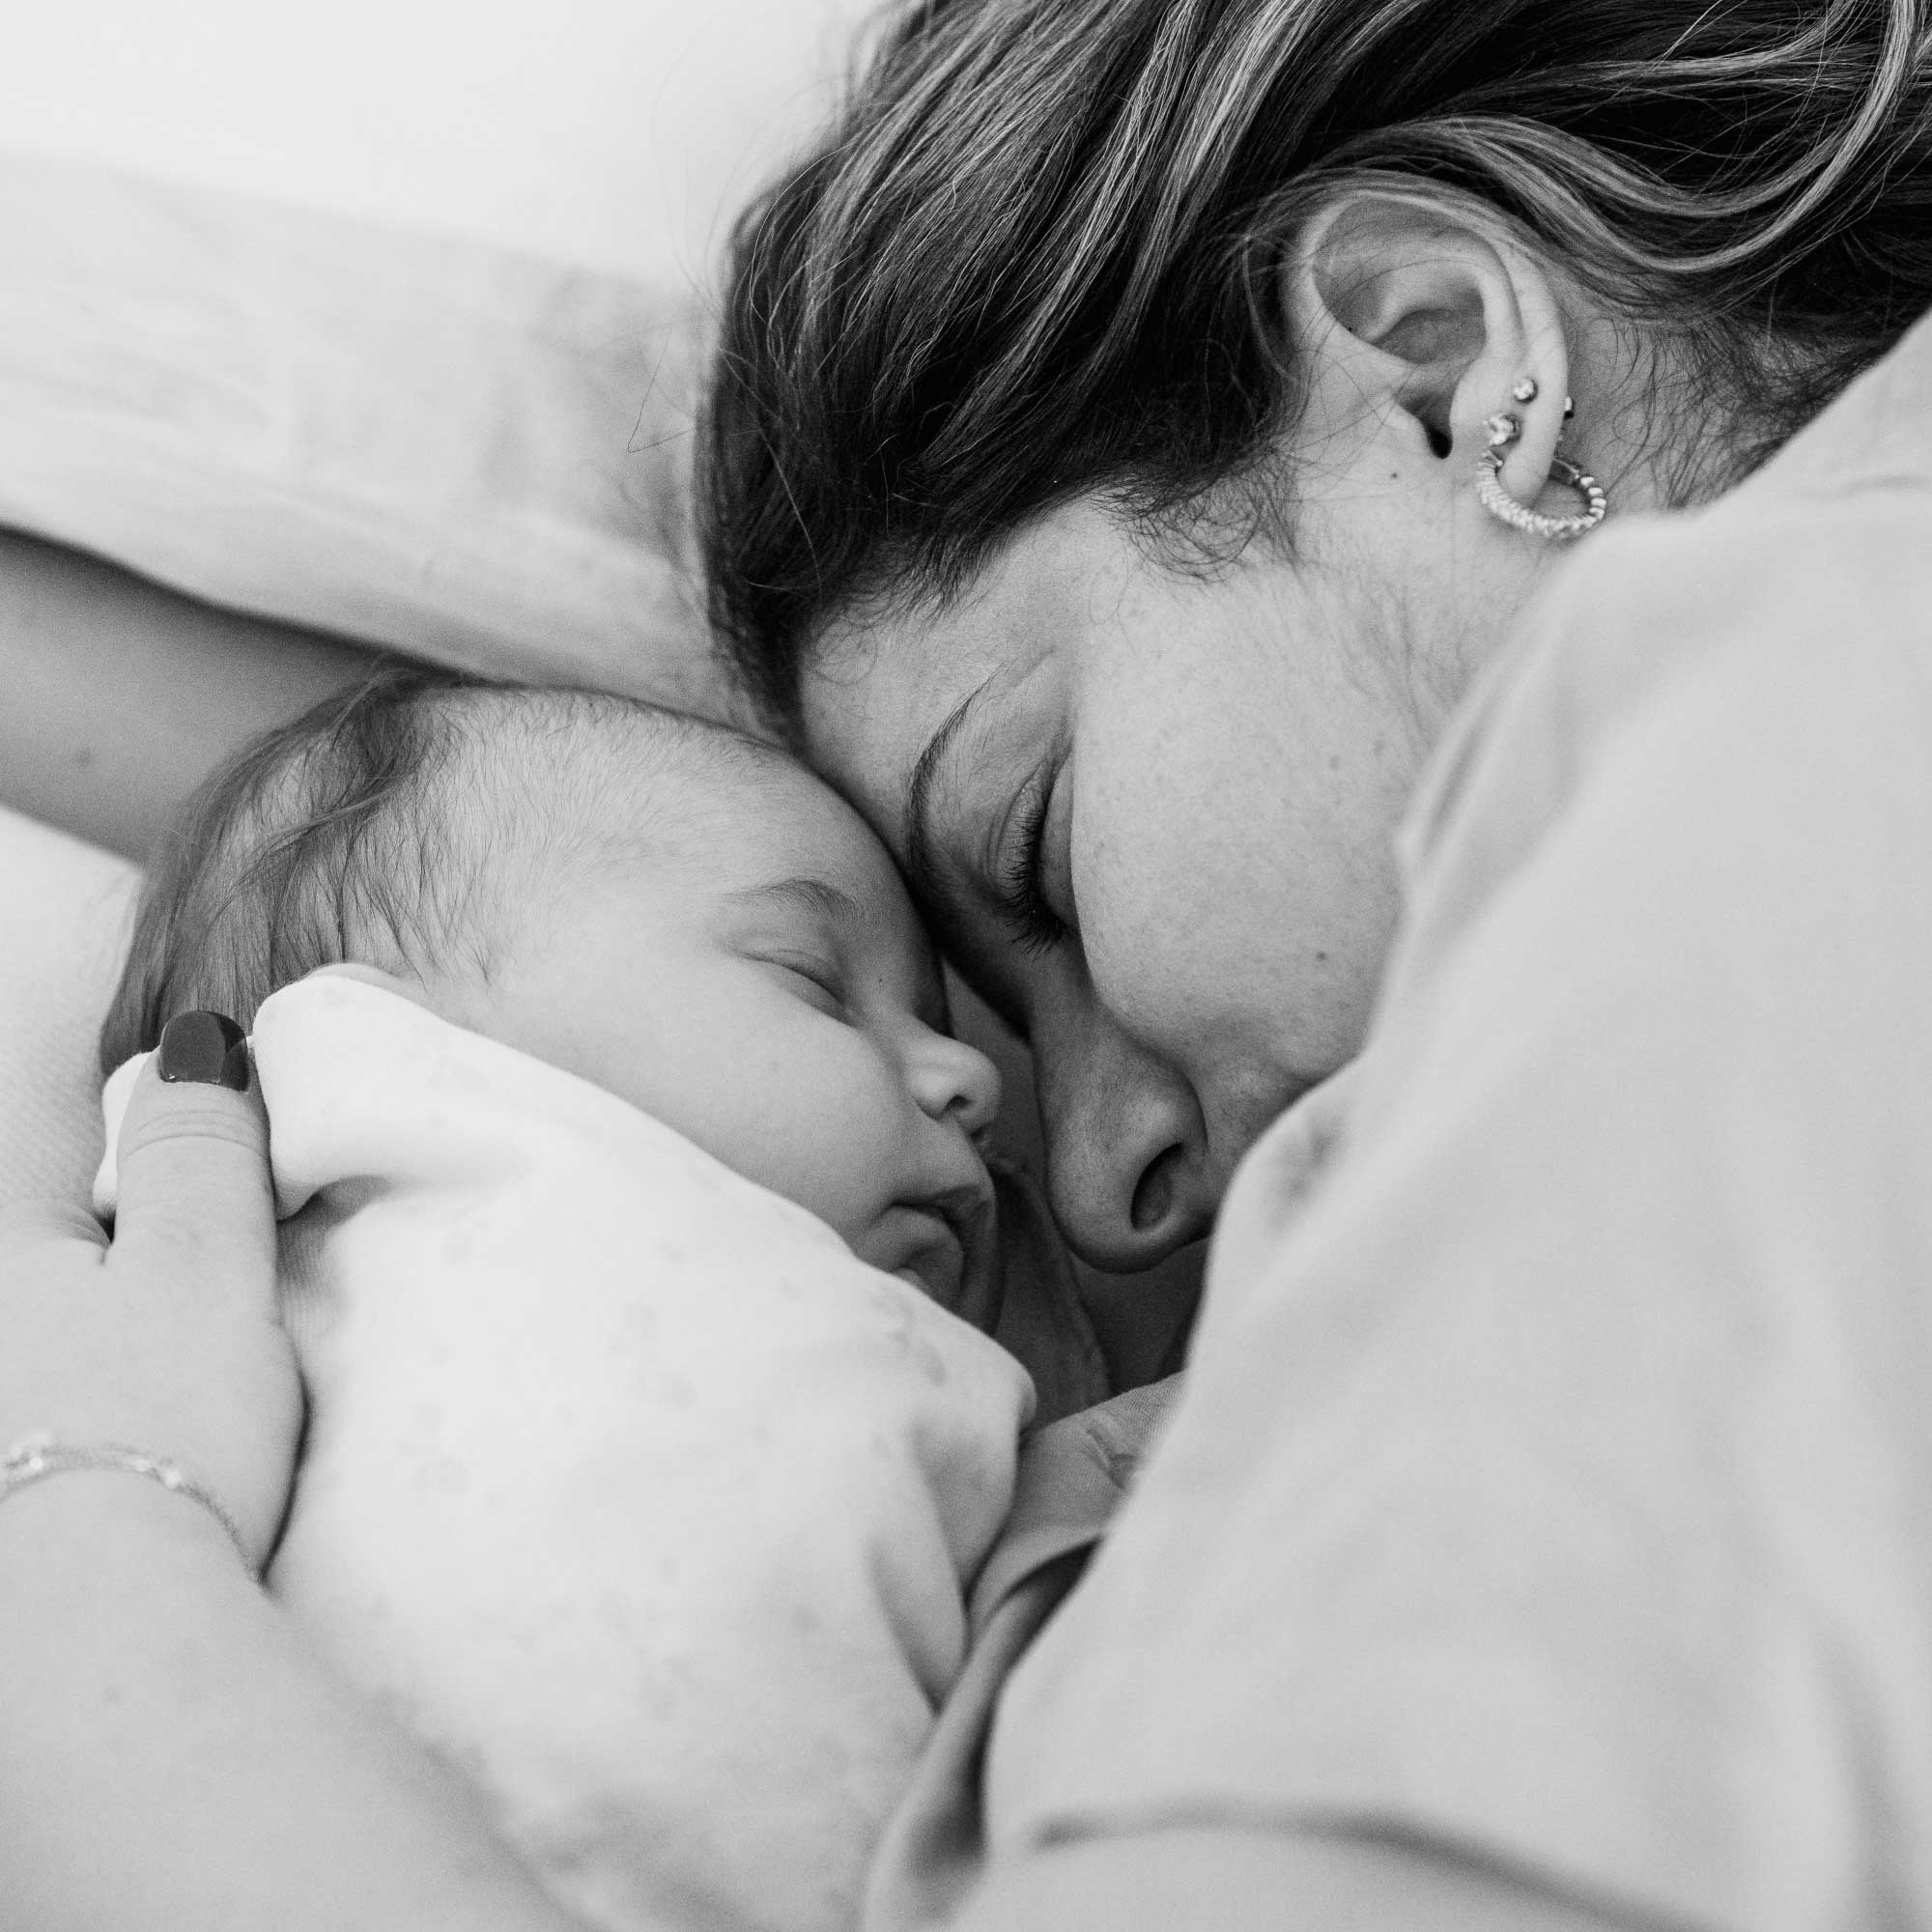 Postpartum Depression: Red Flags To Watch Out For